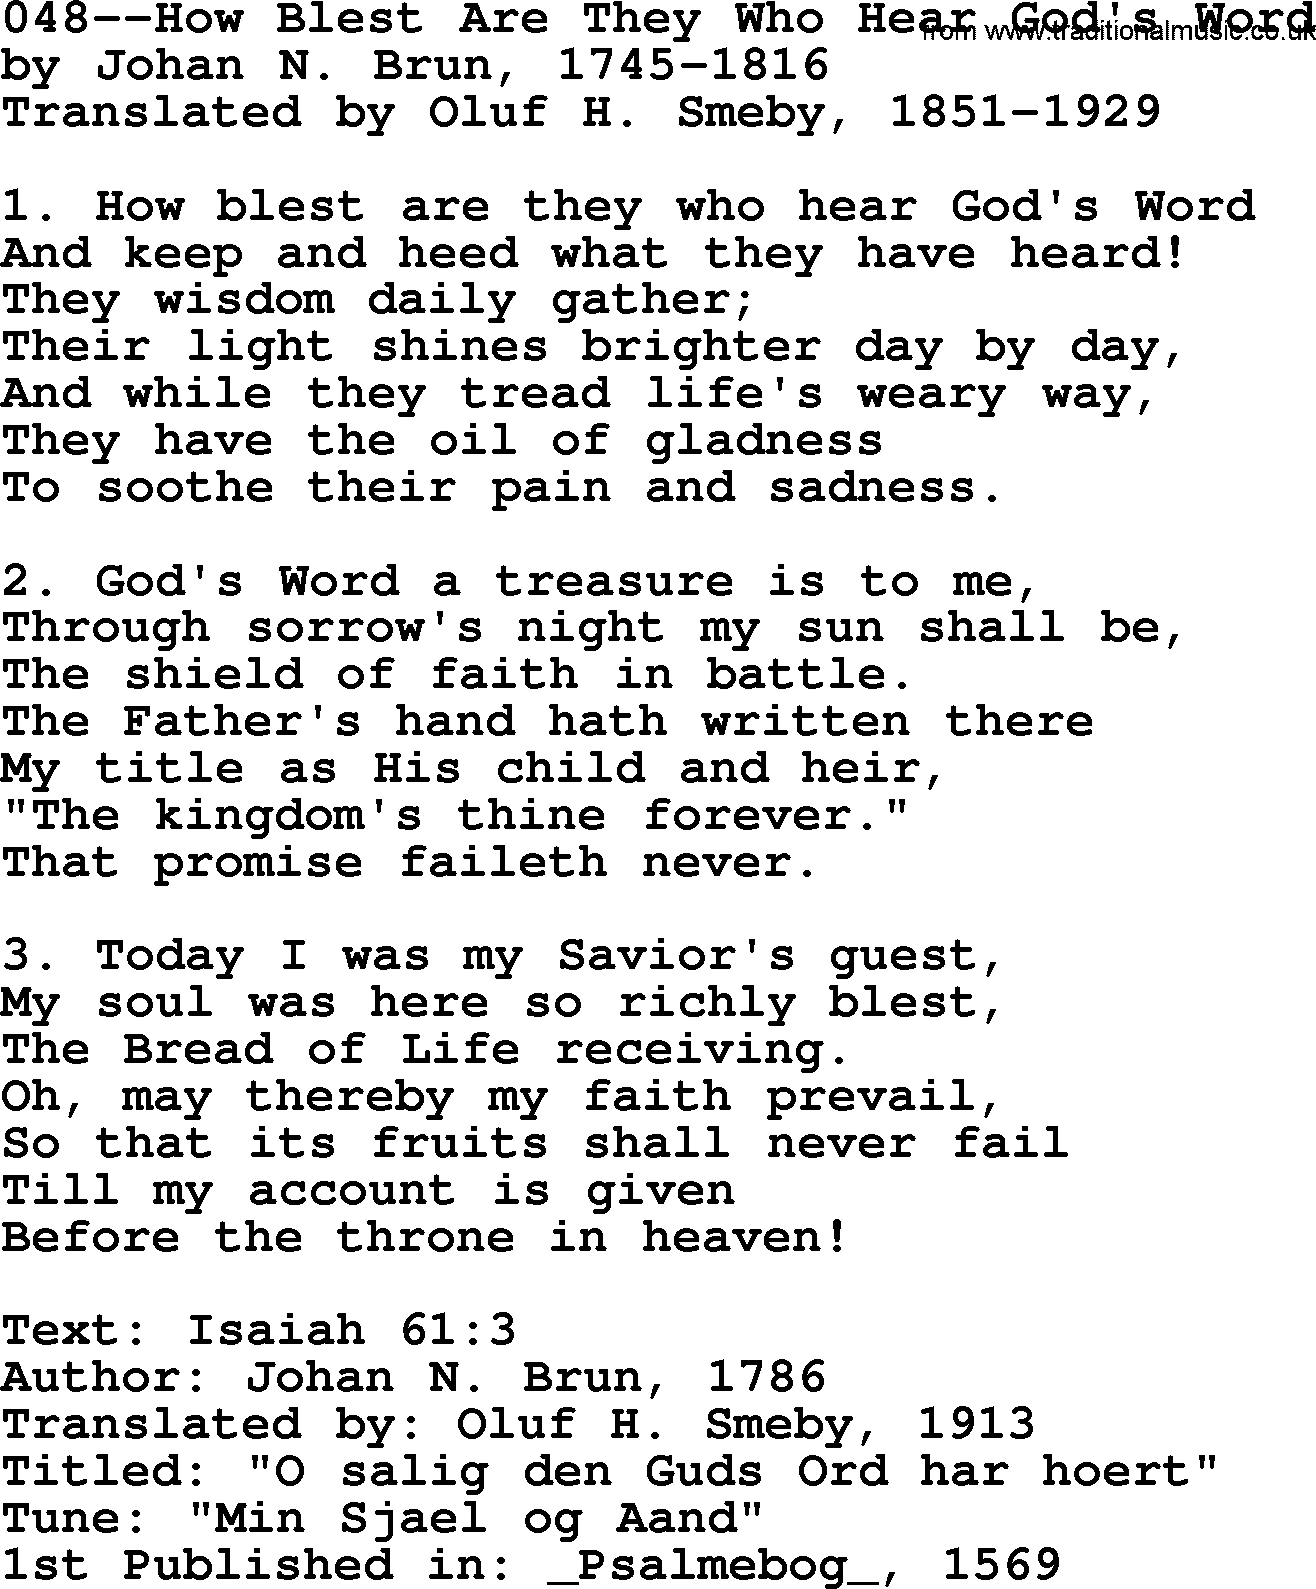 Lutheran Hymn: 048--How Blest Are They Who Hear God's Word.txt lyrics with PDF